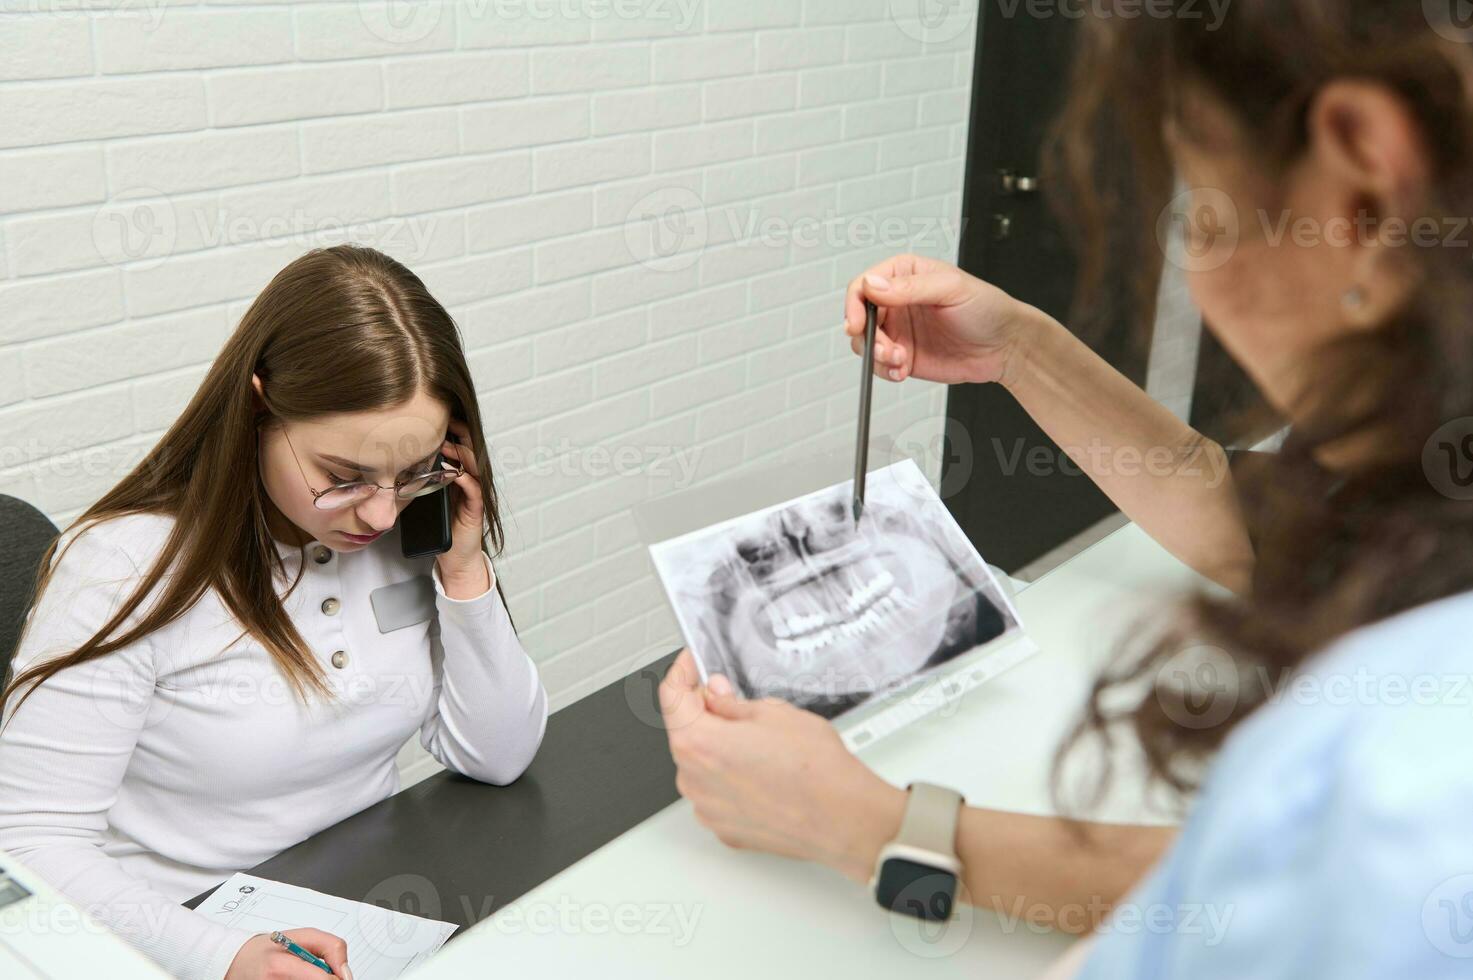 Female receptionist talks on mobile phone. Blurred foreground of a dentist holding dental x-ray panoramic radiography photo